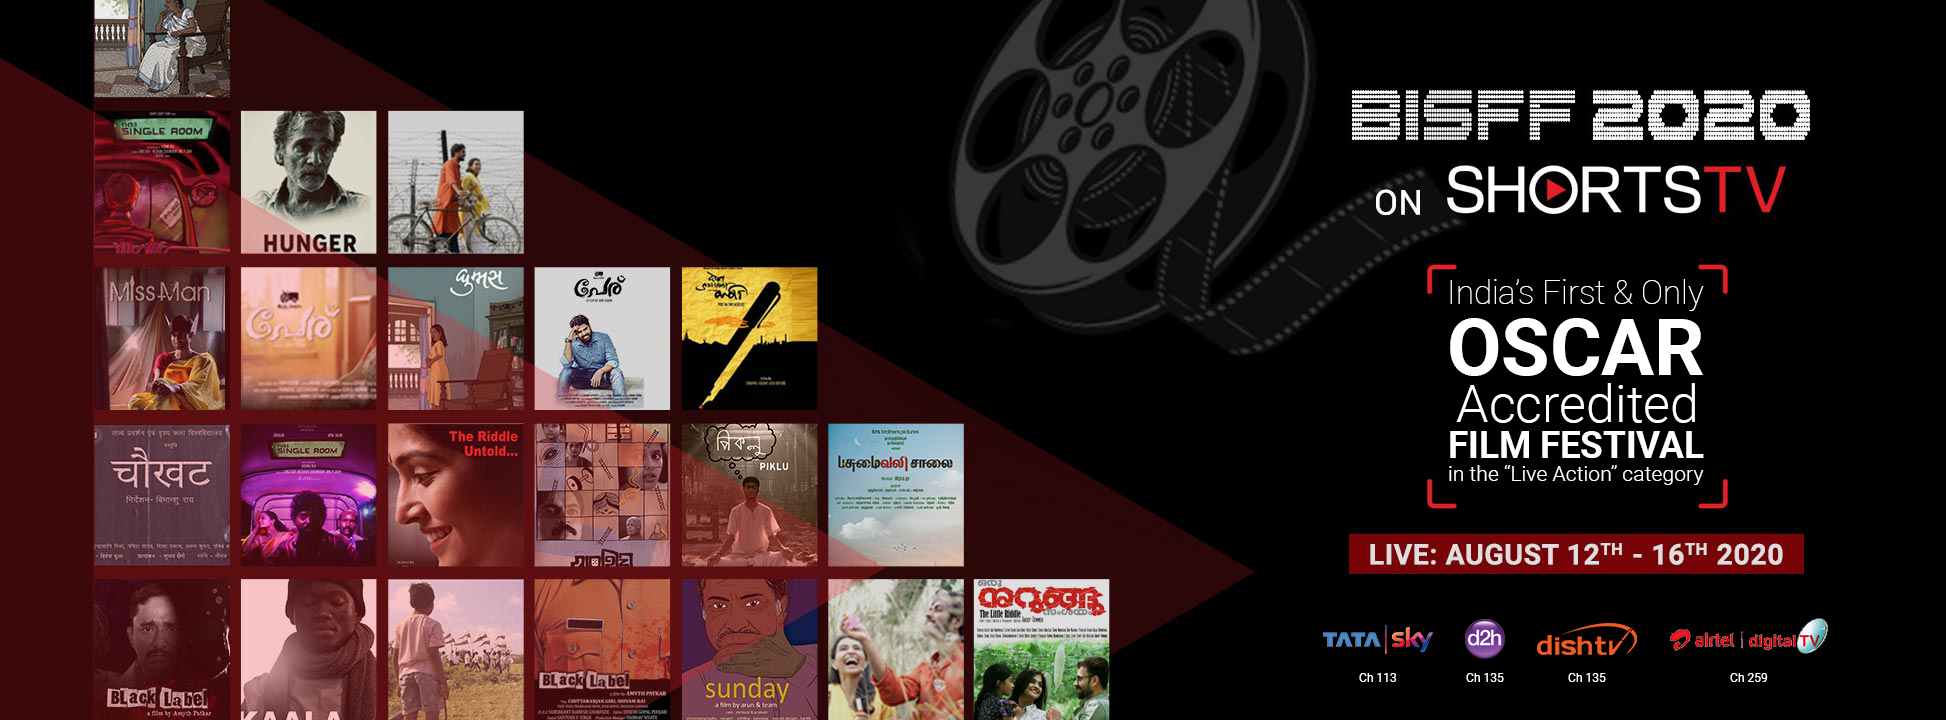 ShortsTV to air exclusively India's Oscar-Accredited Short Film Festival in Live Action Category: International Short Film Festival | ShortsTV